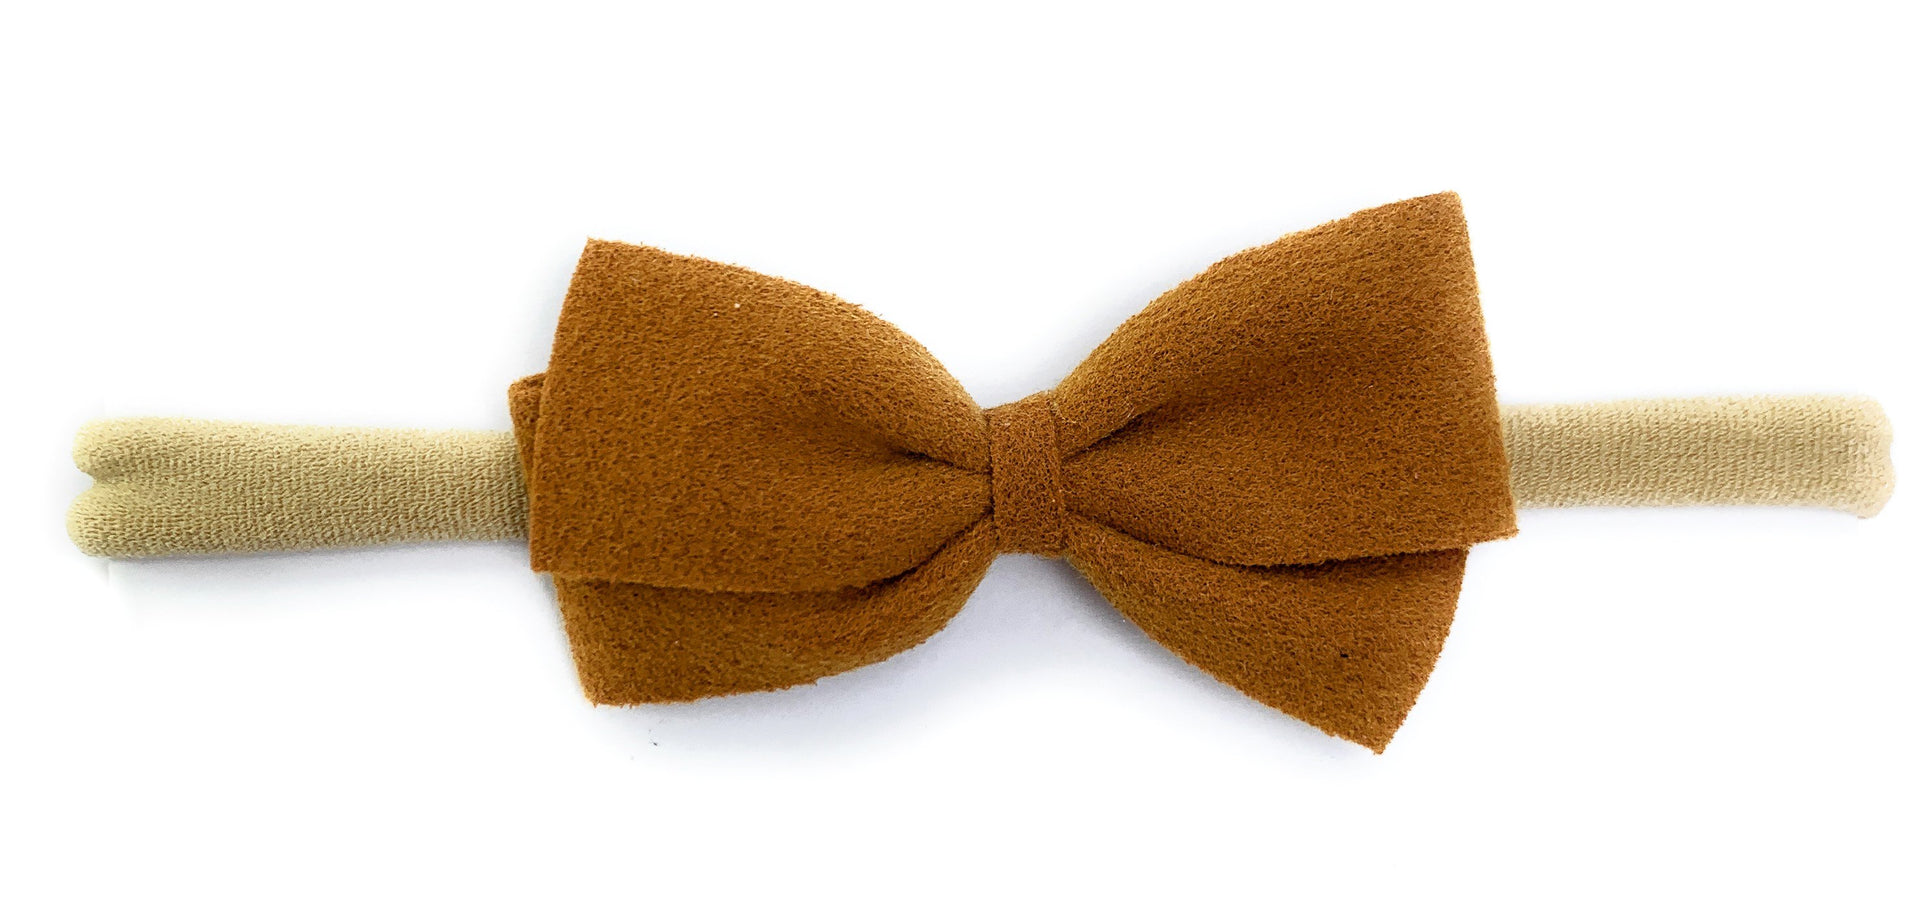 Thali Faux Suede Bow Headband for Babies Baby Wisp